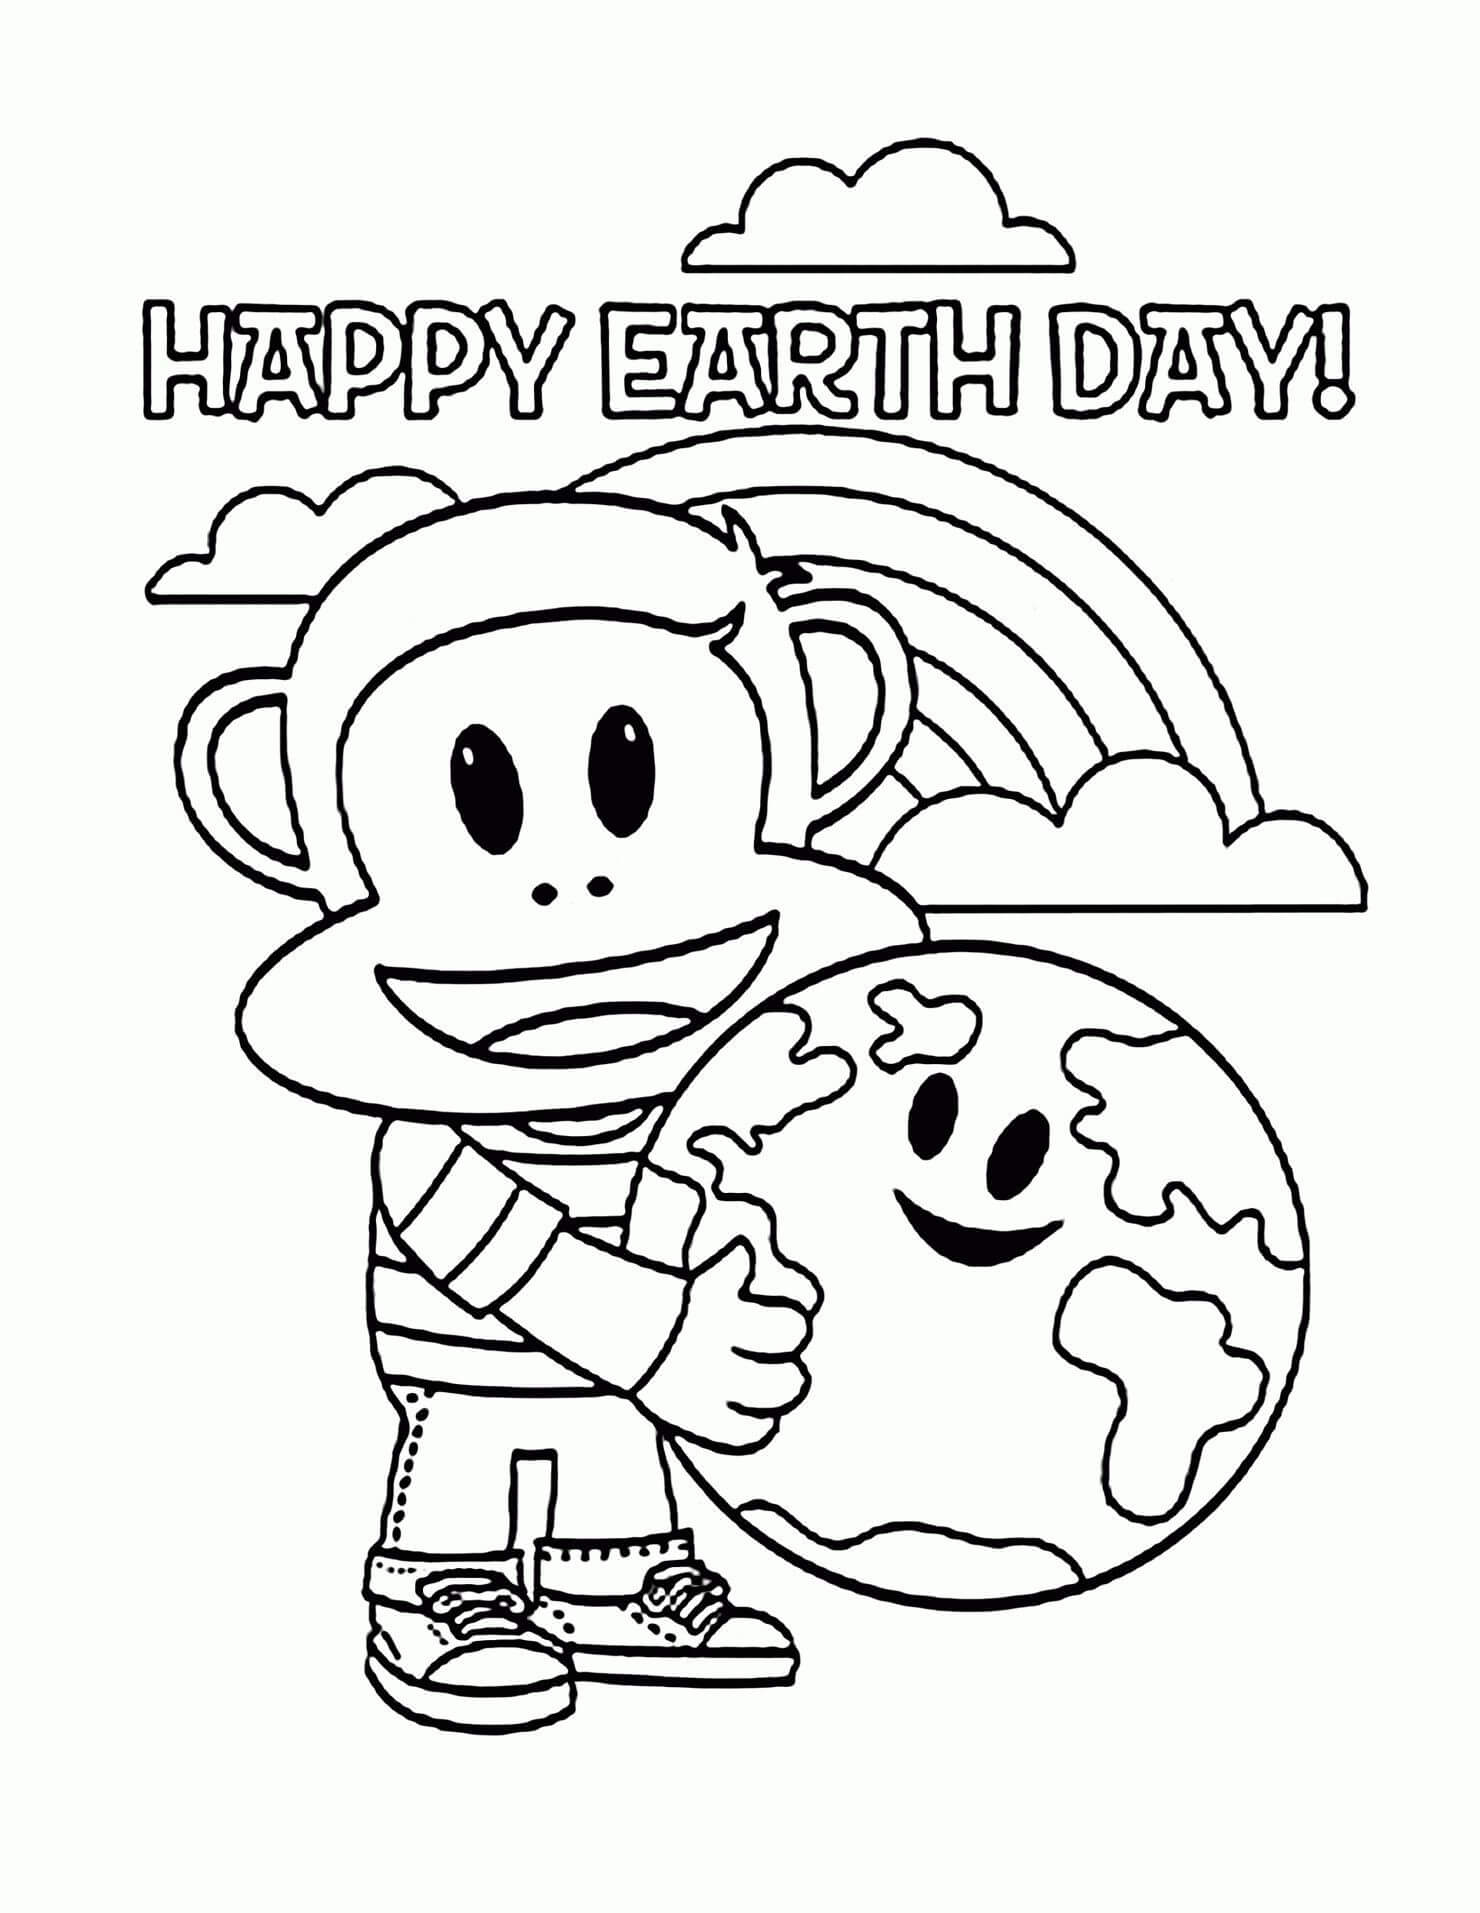 download-181-earth-day-coloring-pages-png-pdf-file-free-fonts-and-popular-downloads-for-word